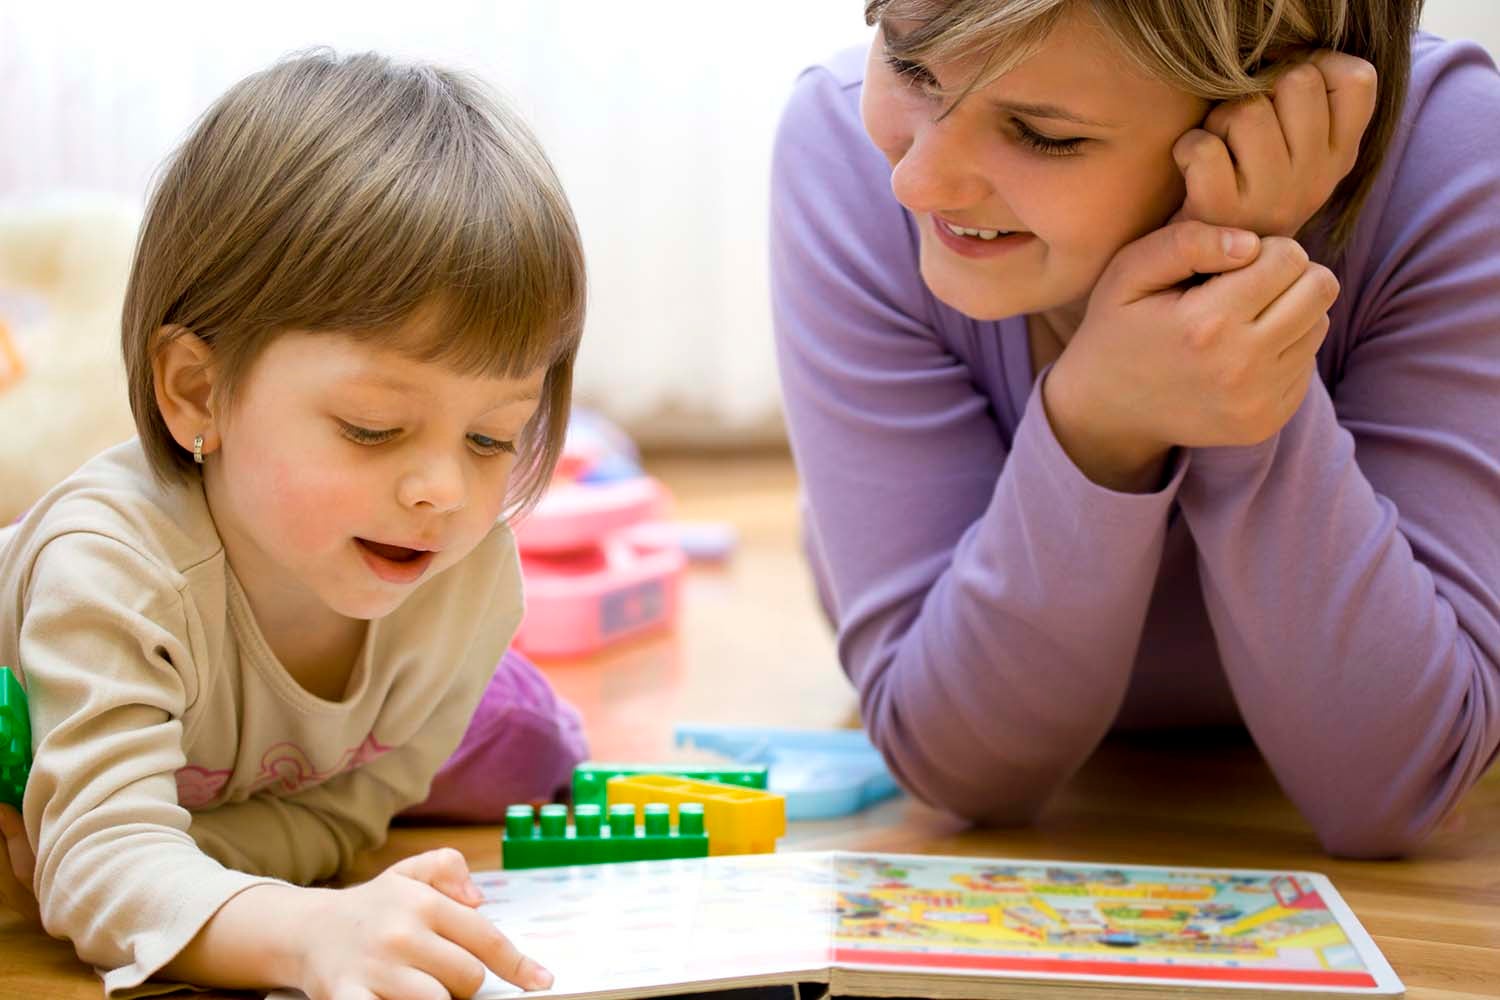 Finding the right balance between helping and letting kids learn independently